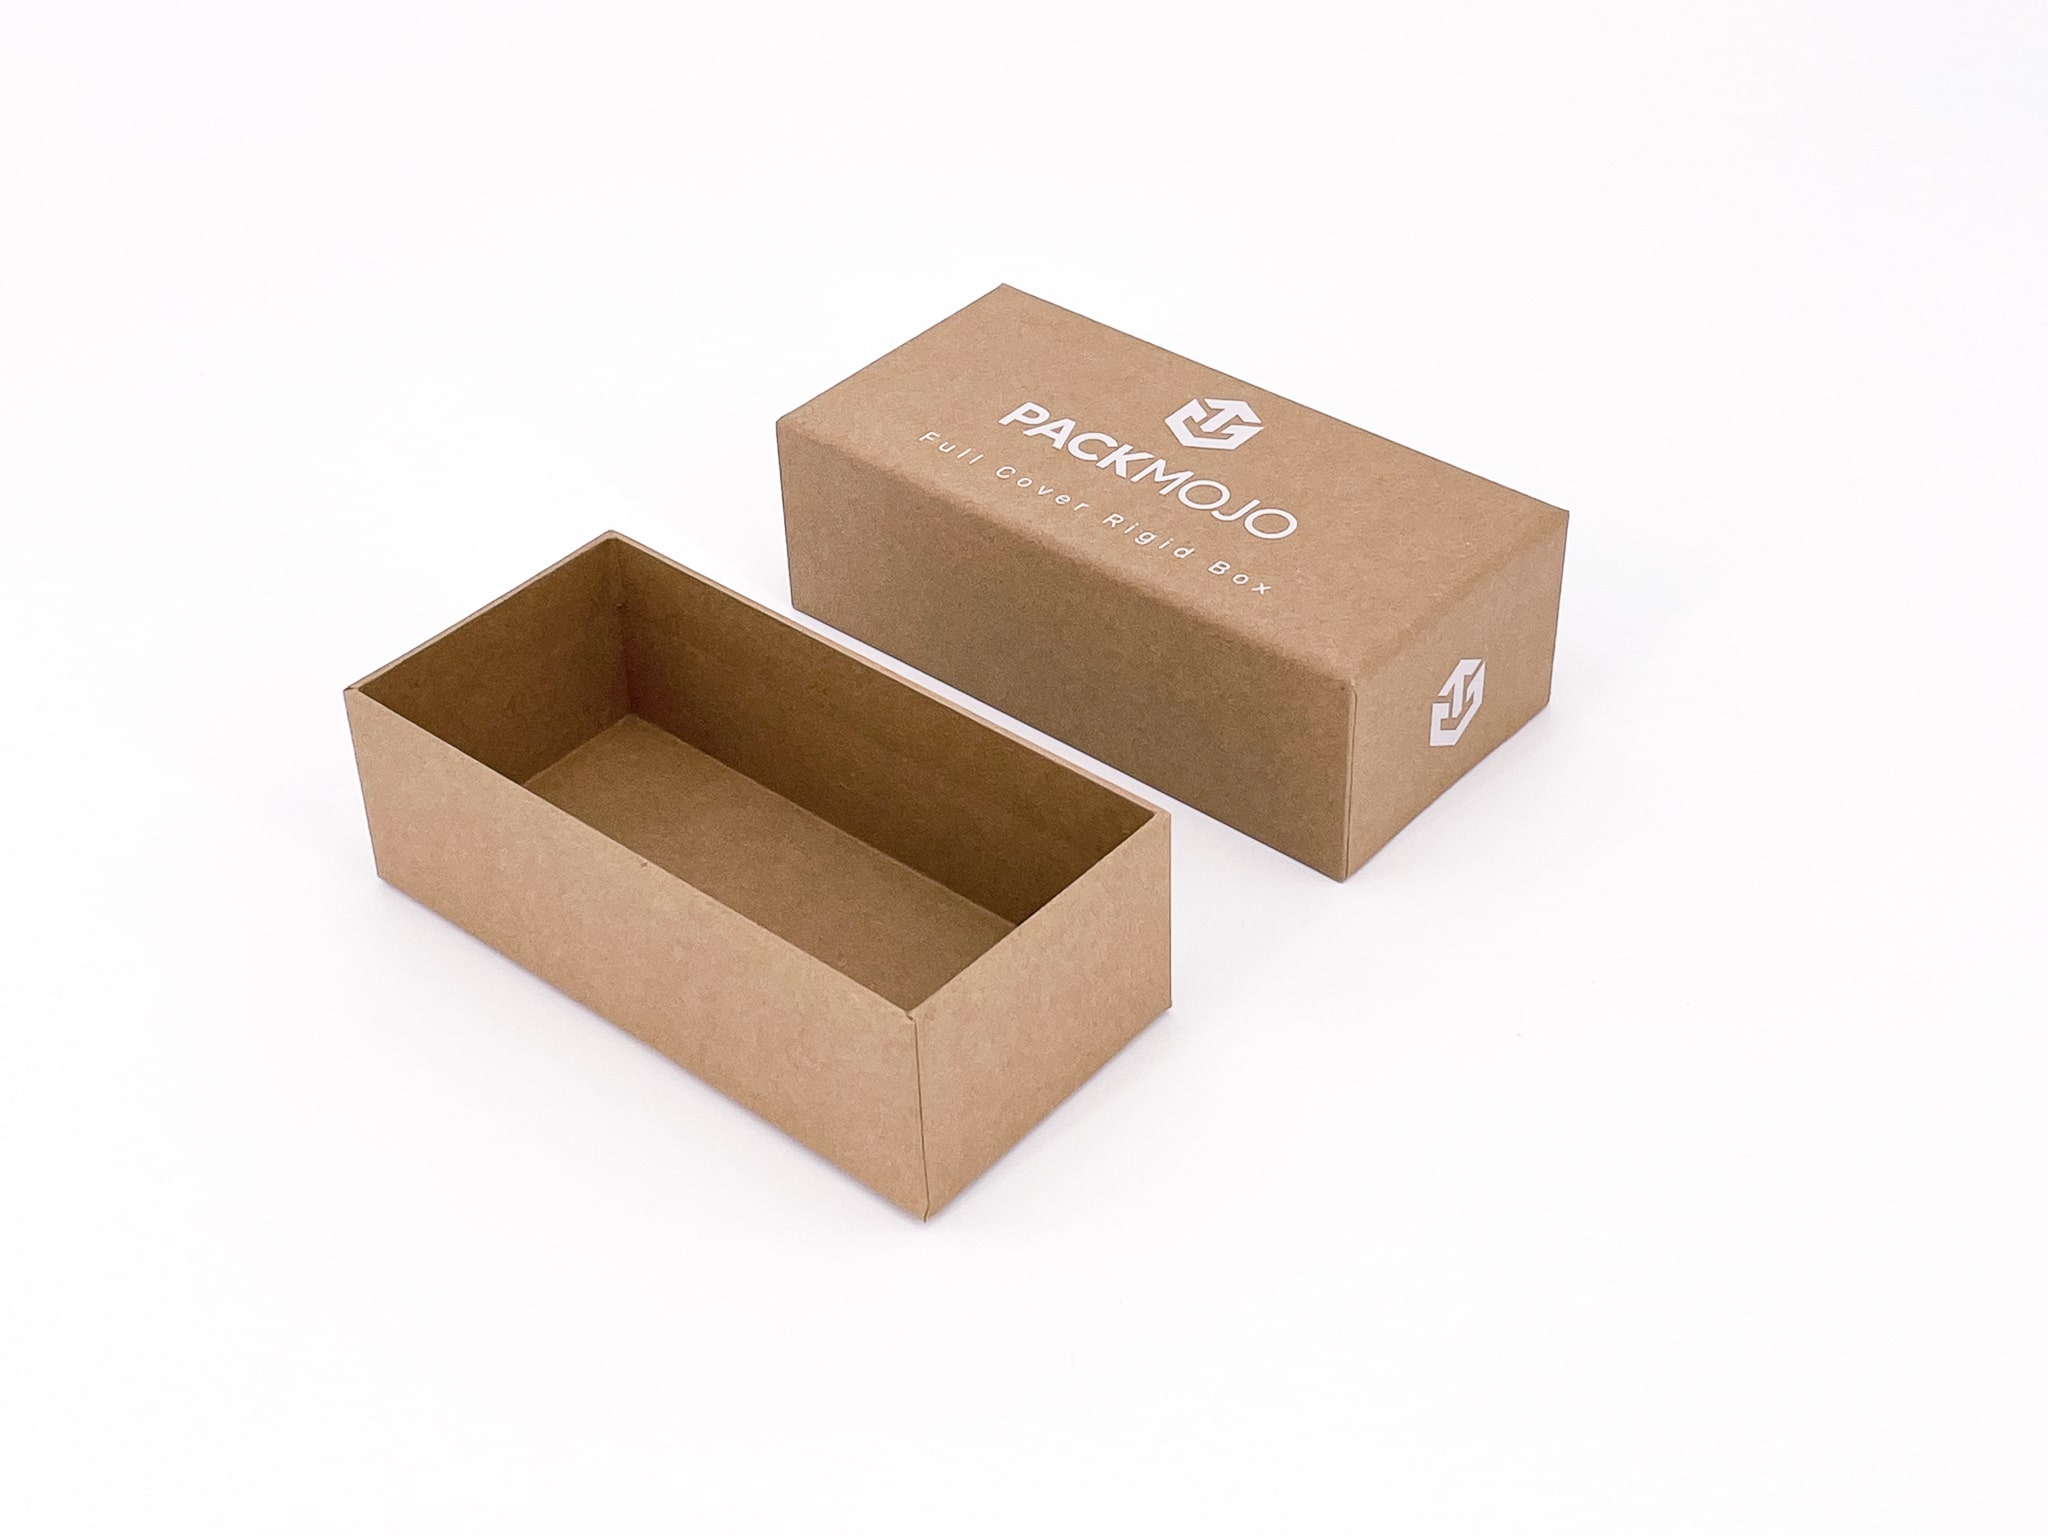 Sample-filled boxes